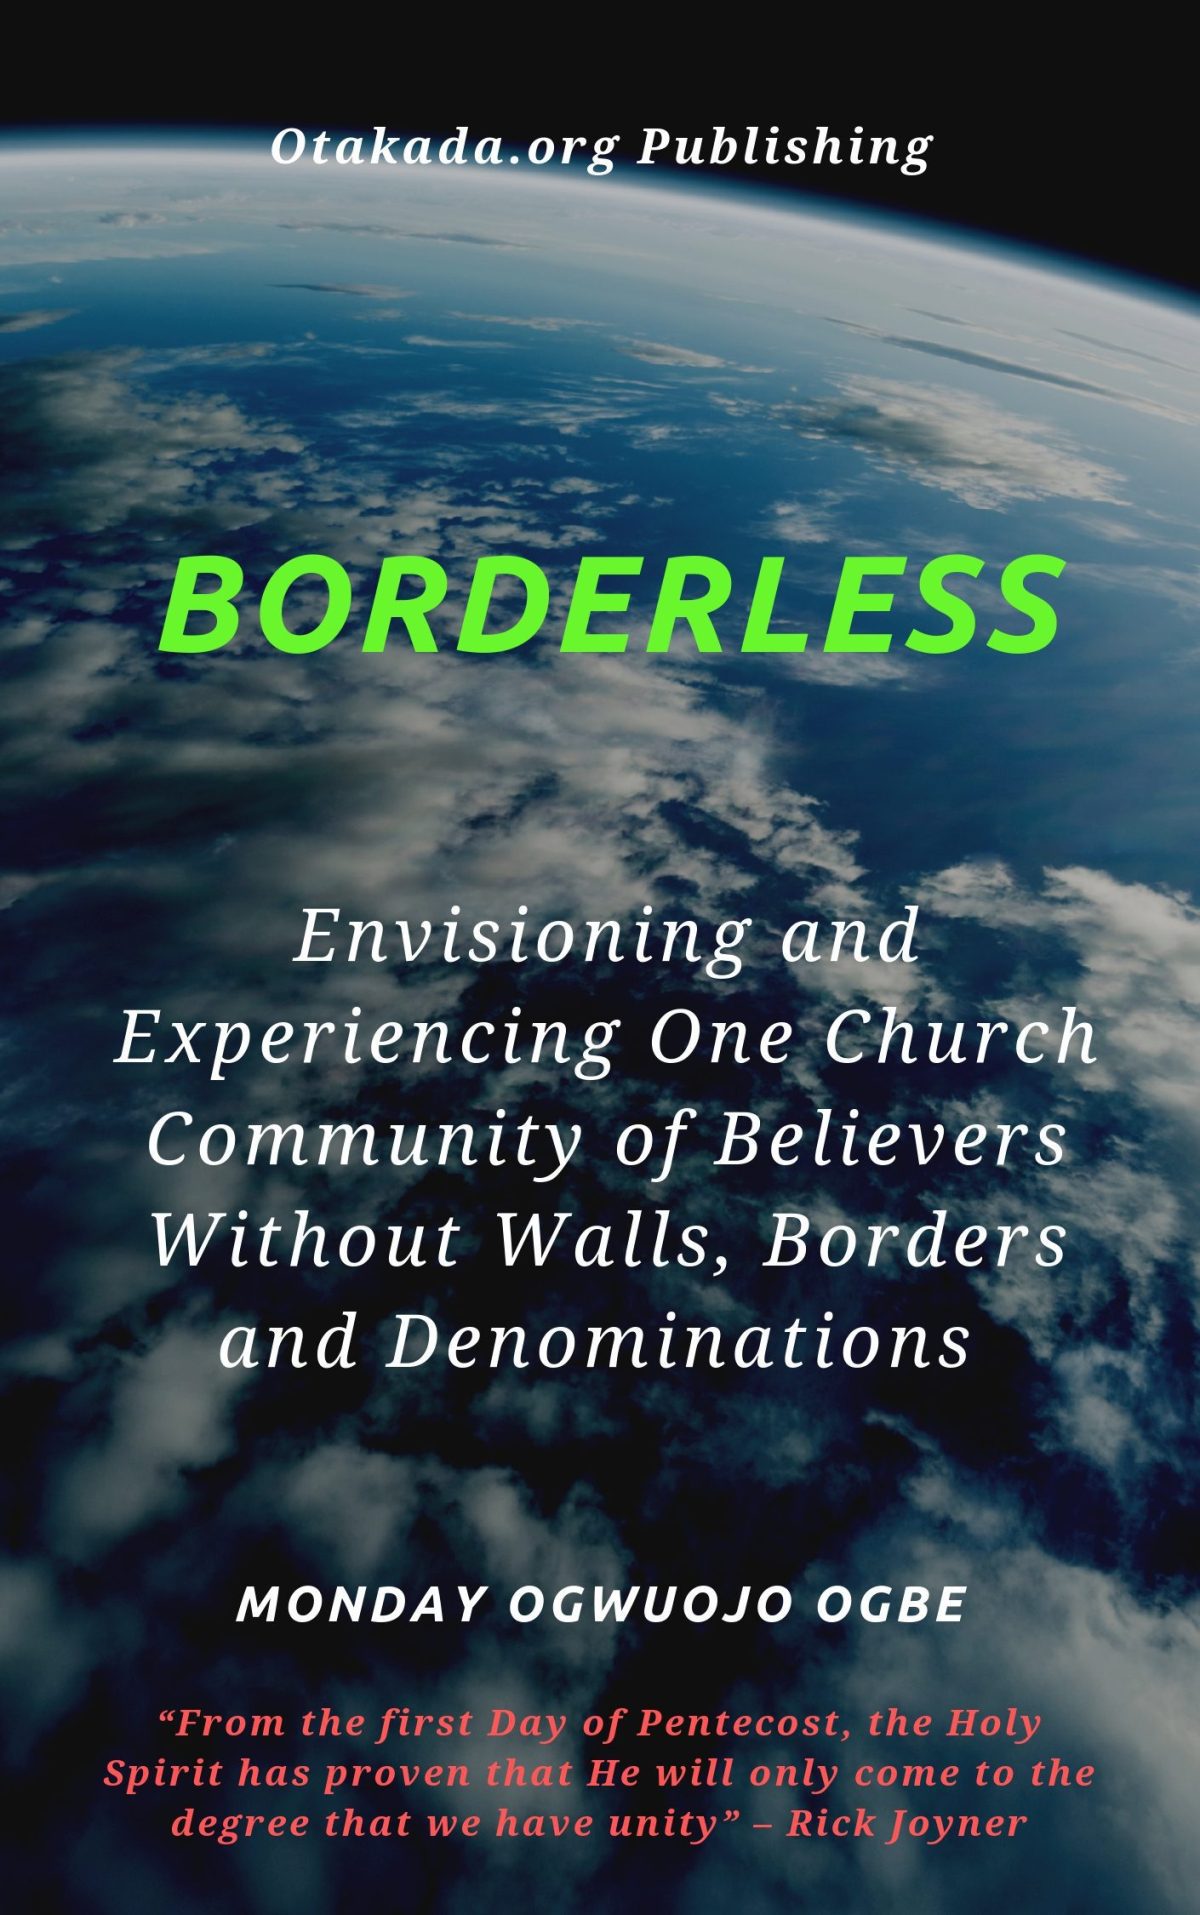 Borderless - Envisioning and Experiencing One Church Community of Believers Without Walls